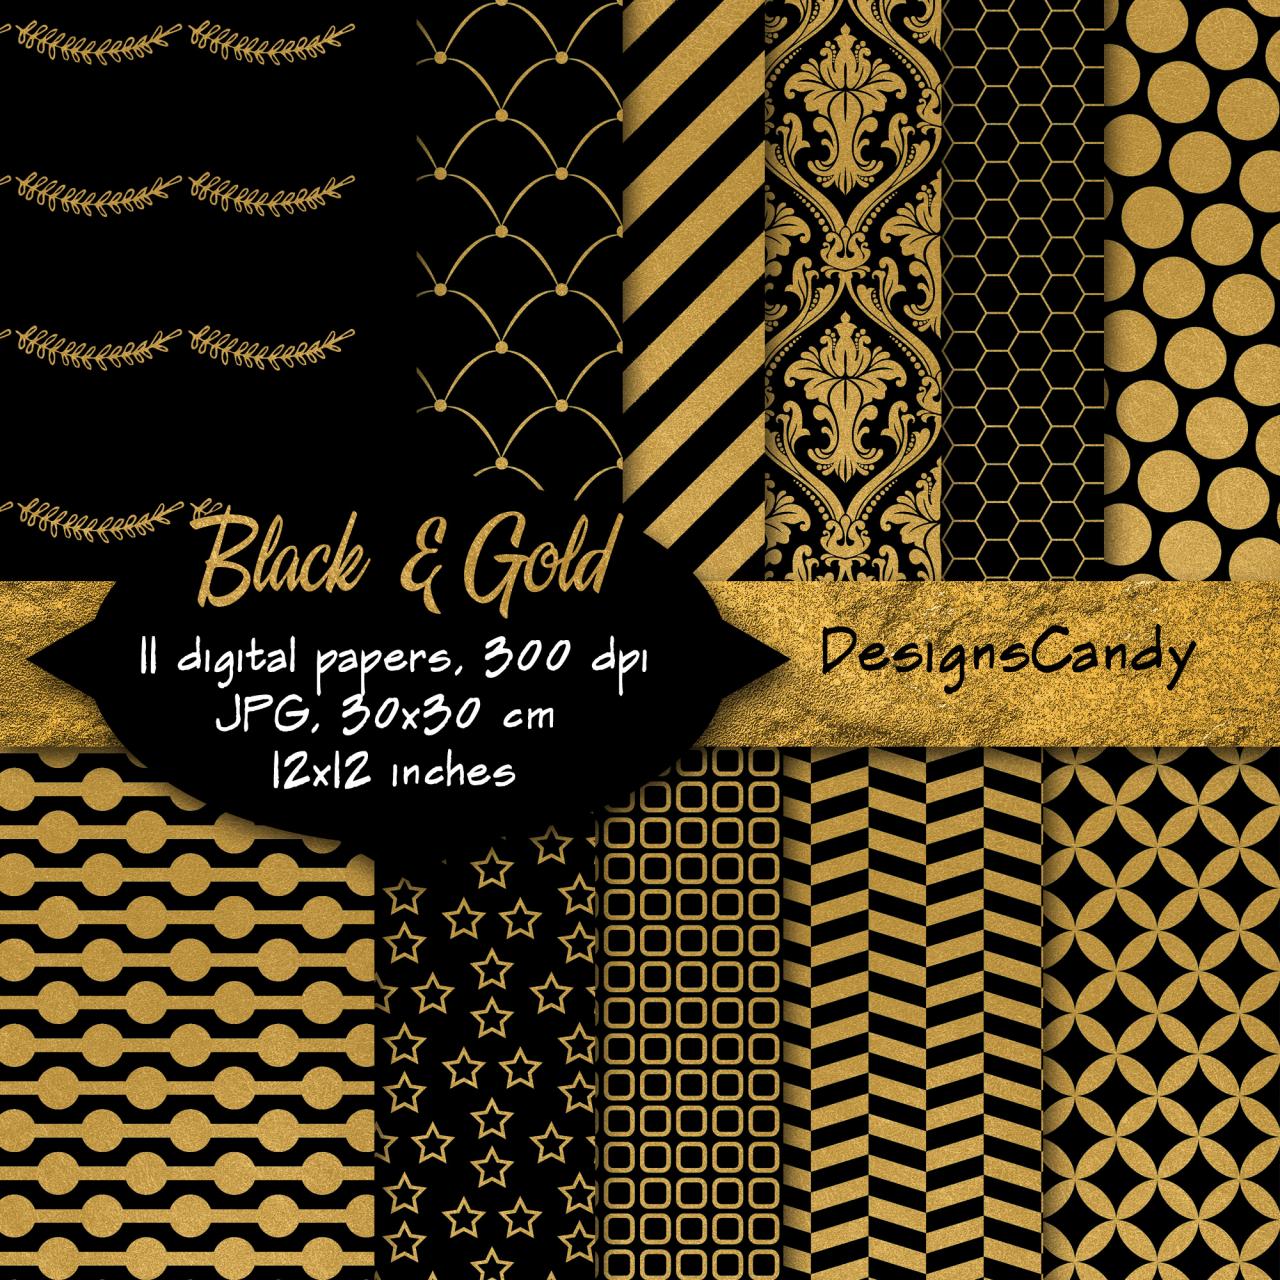 Black & Gold Patterns, Digital Background, Scrapbook Paper, Printable Paper, Web Design. personal and commercial use.